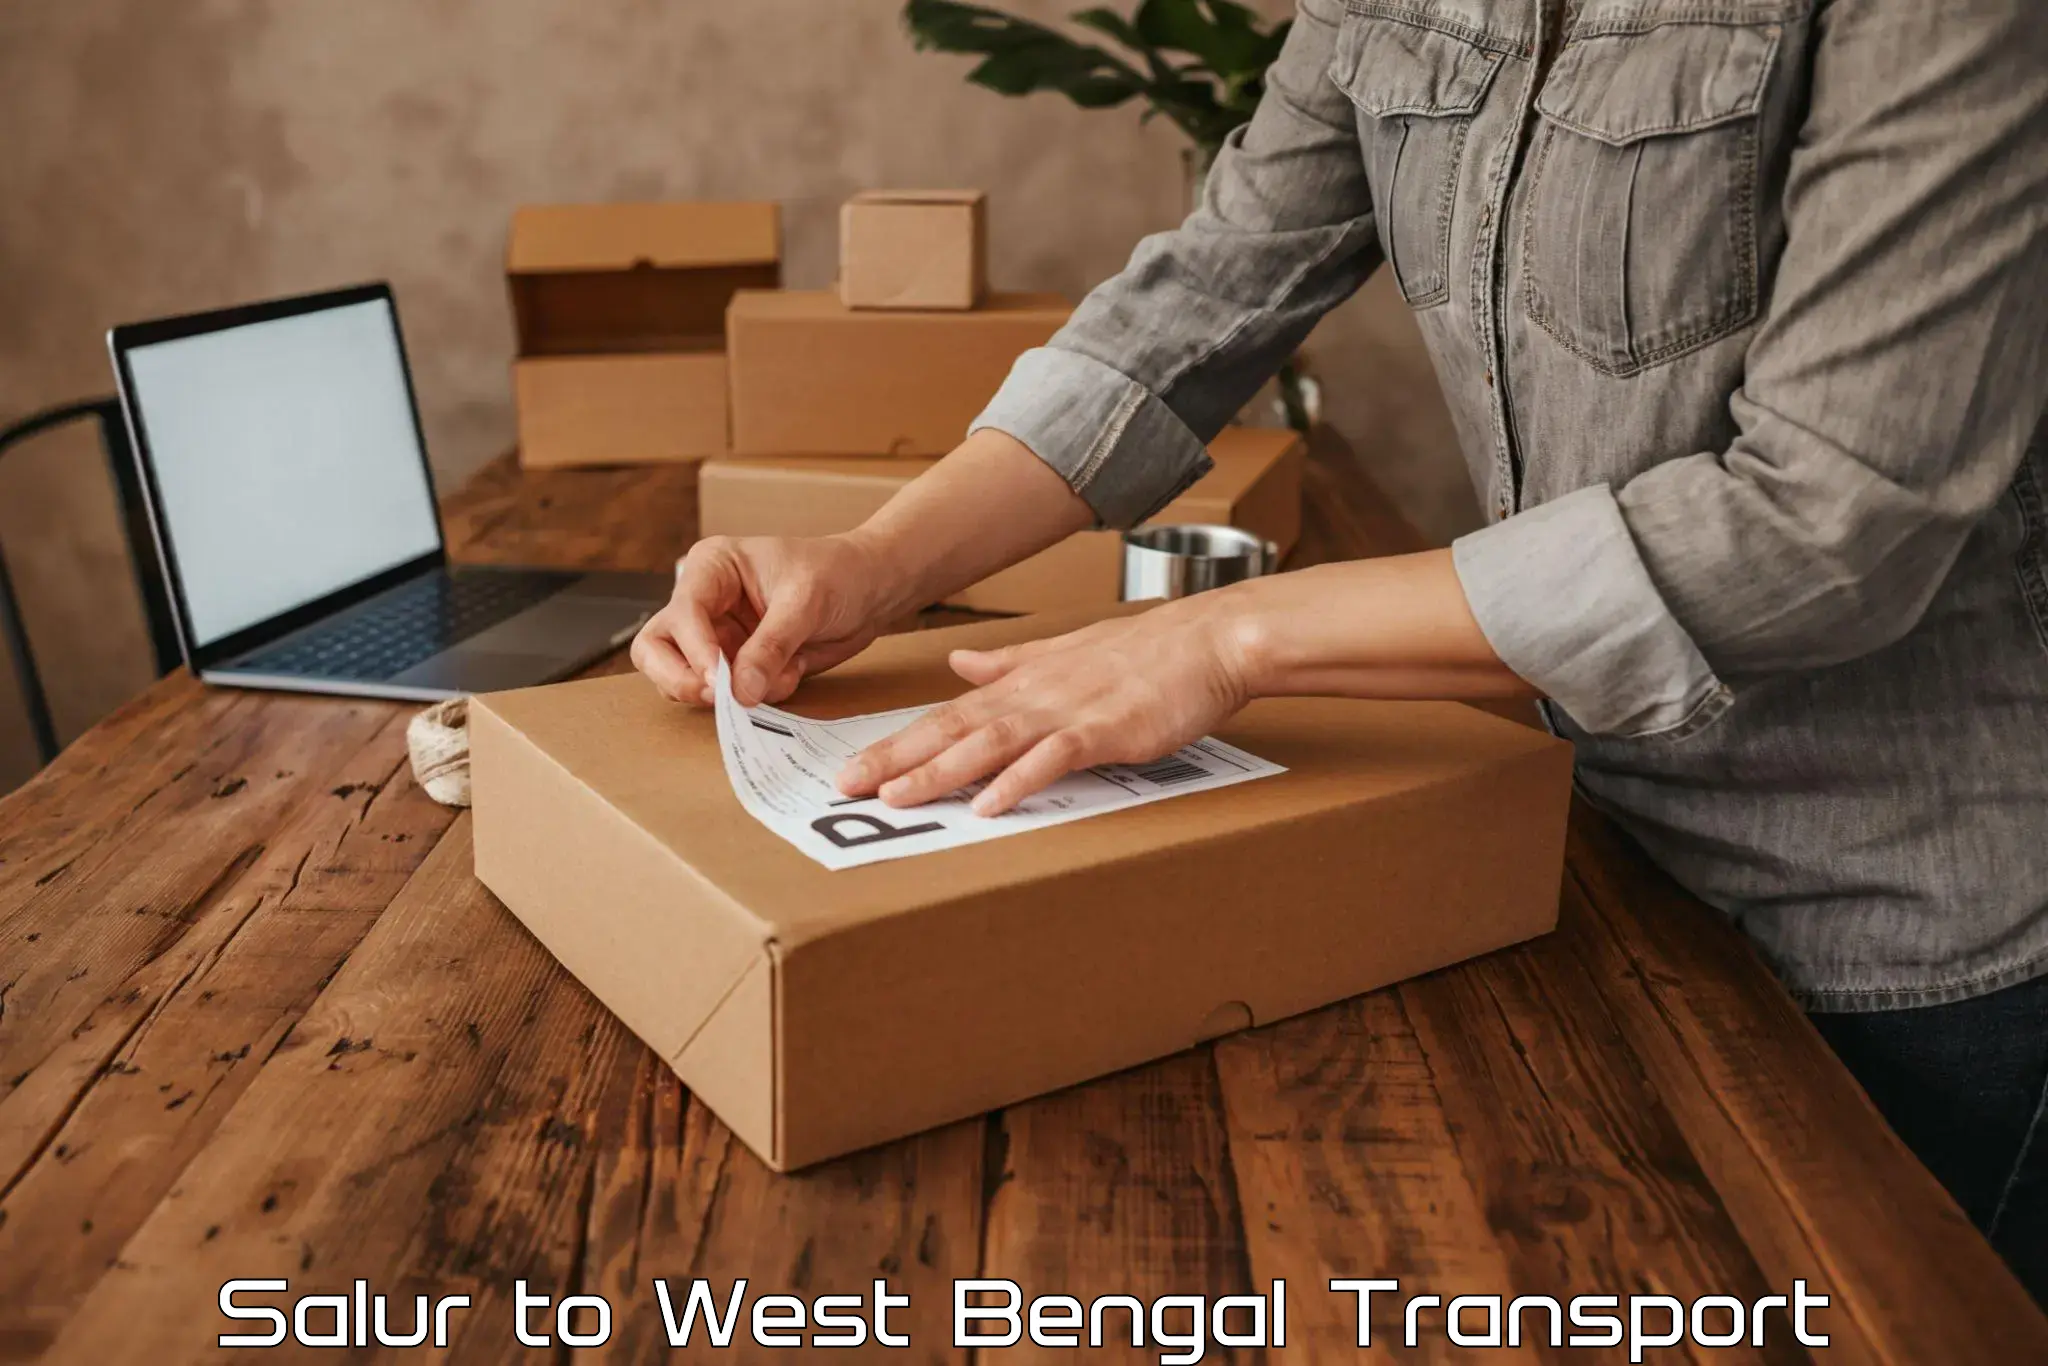 Commercial transport service Salur to West Bengal